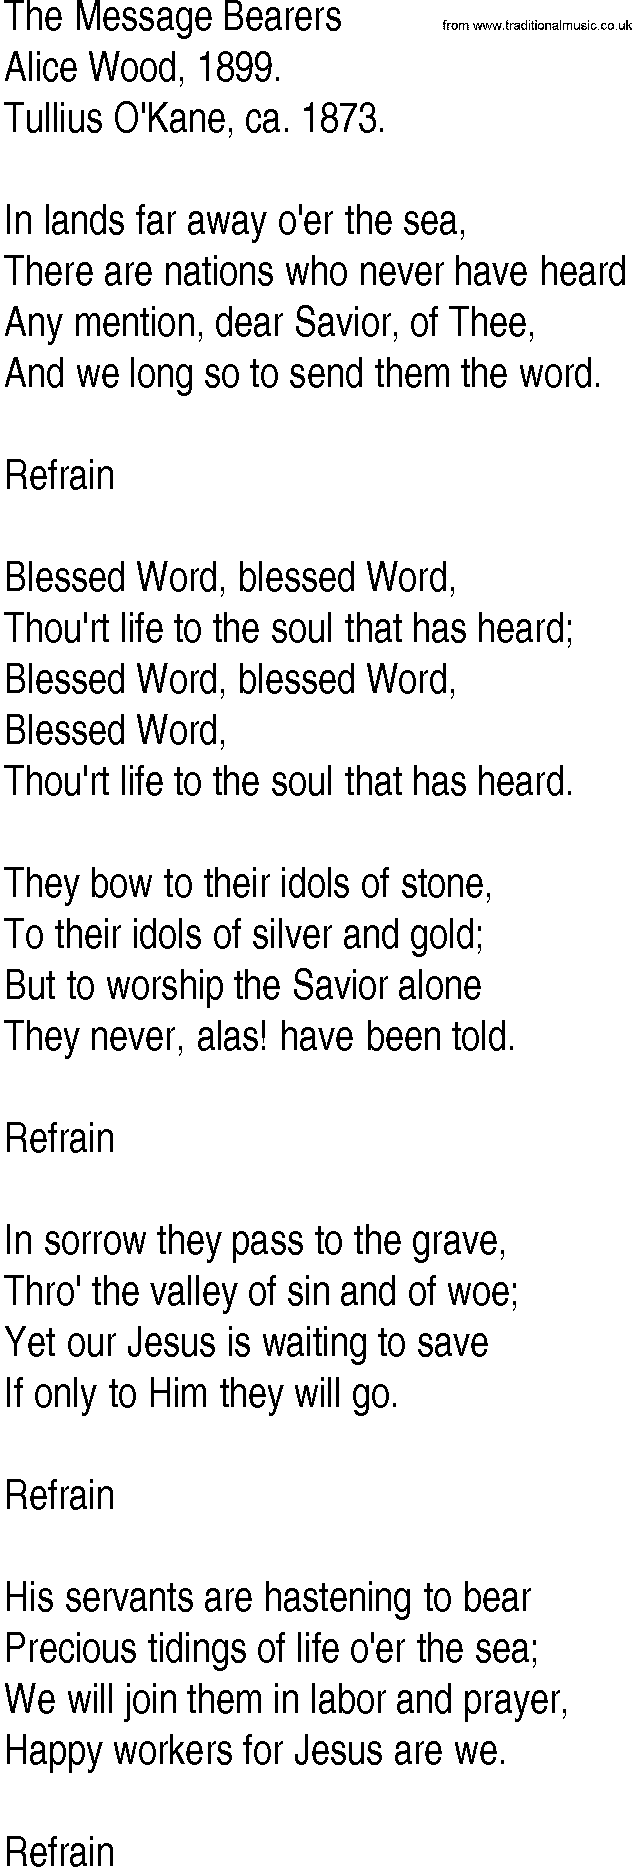 Hymn and Gospel Song: The Message Bearers by Alice Wood lyrics